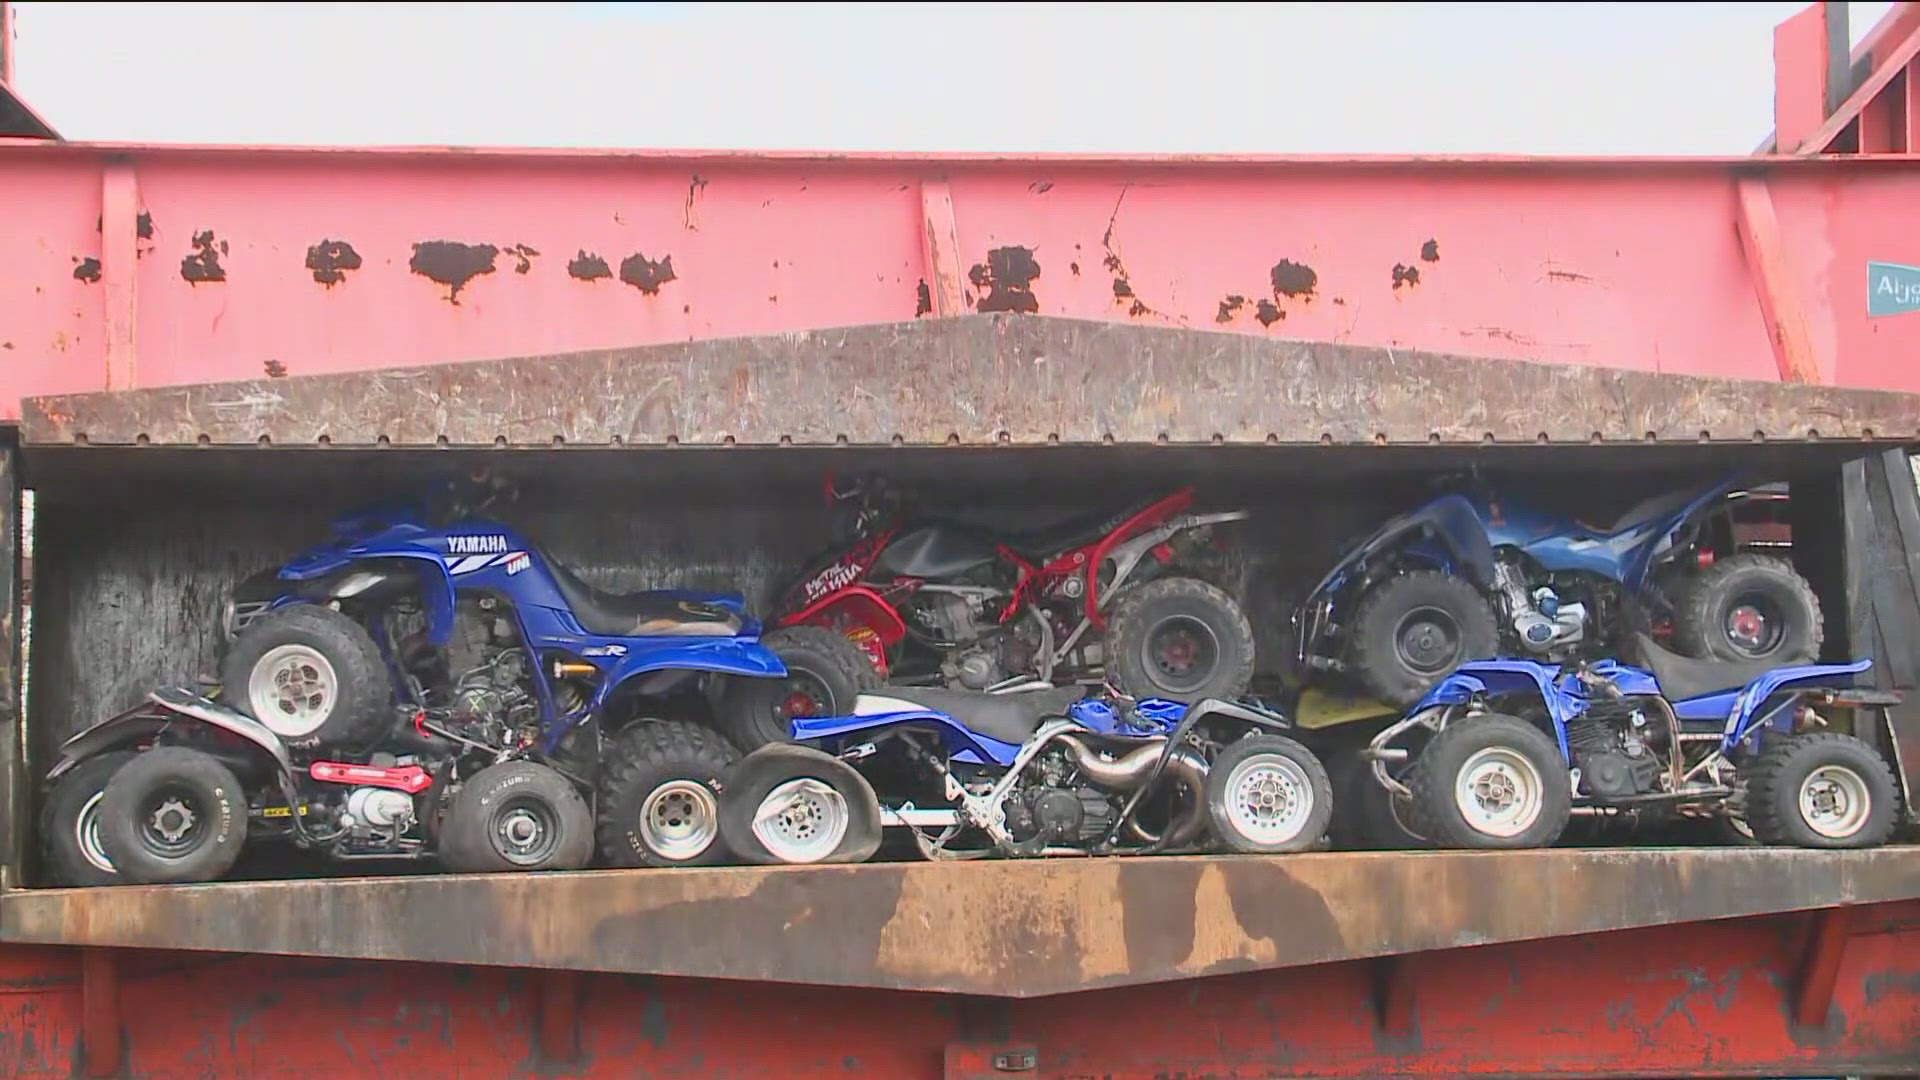 The town of Wallingford has seen an increase in people riding illegal dirt bikes and ATVs, as well as an uptick in aggressive driving.